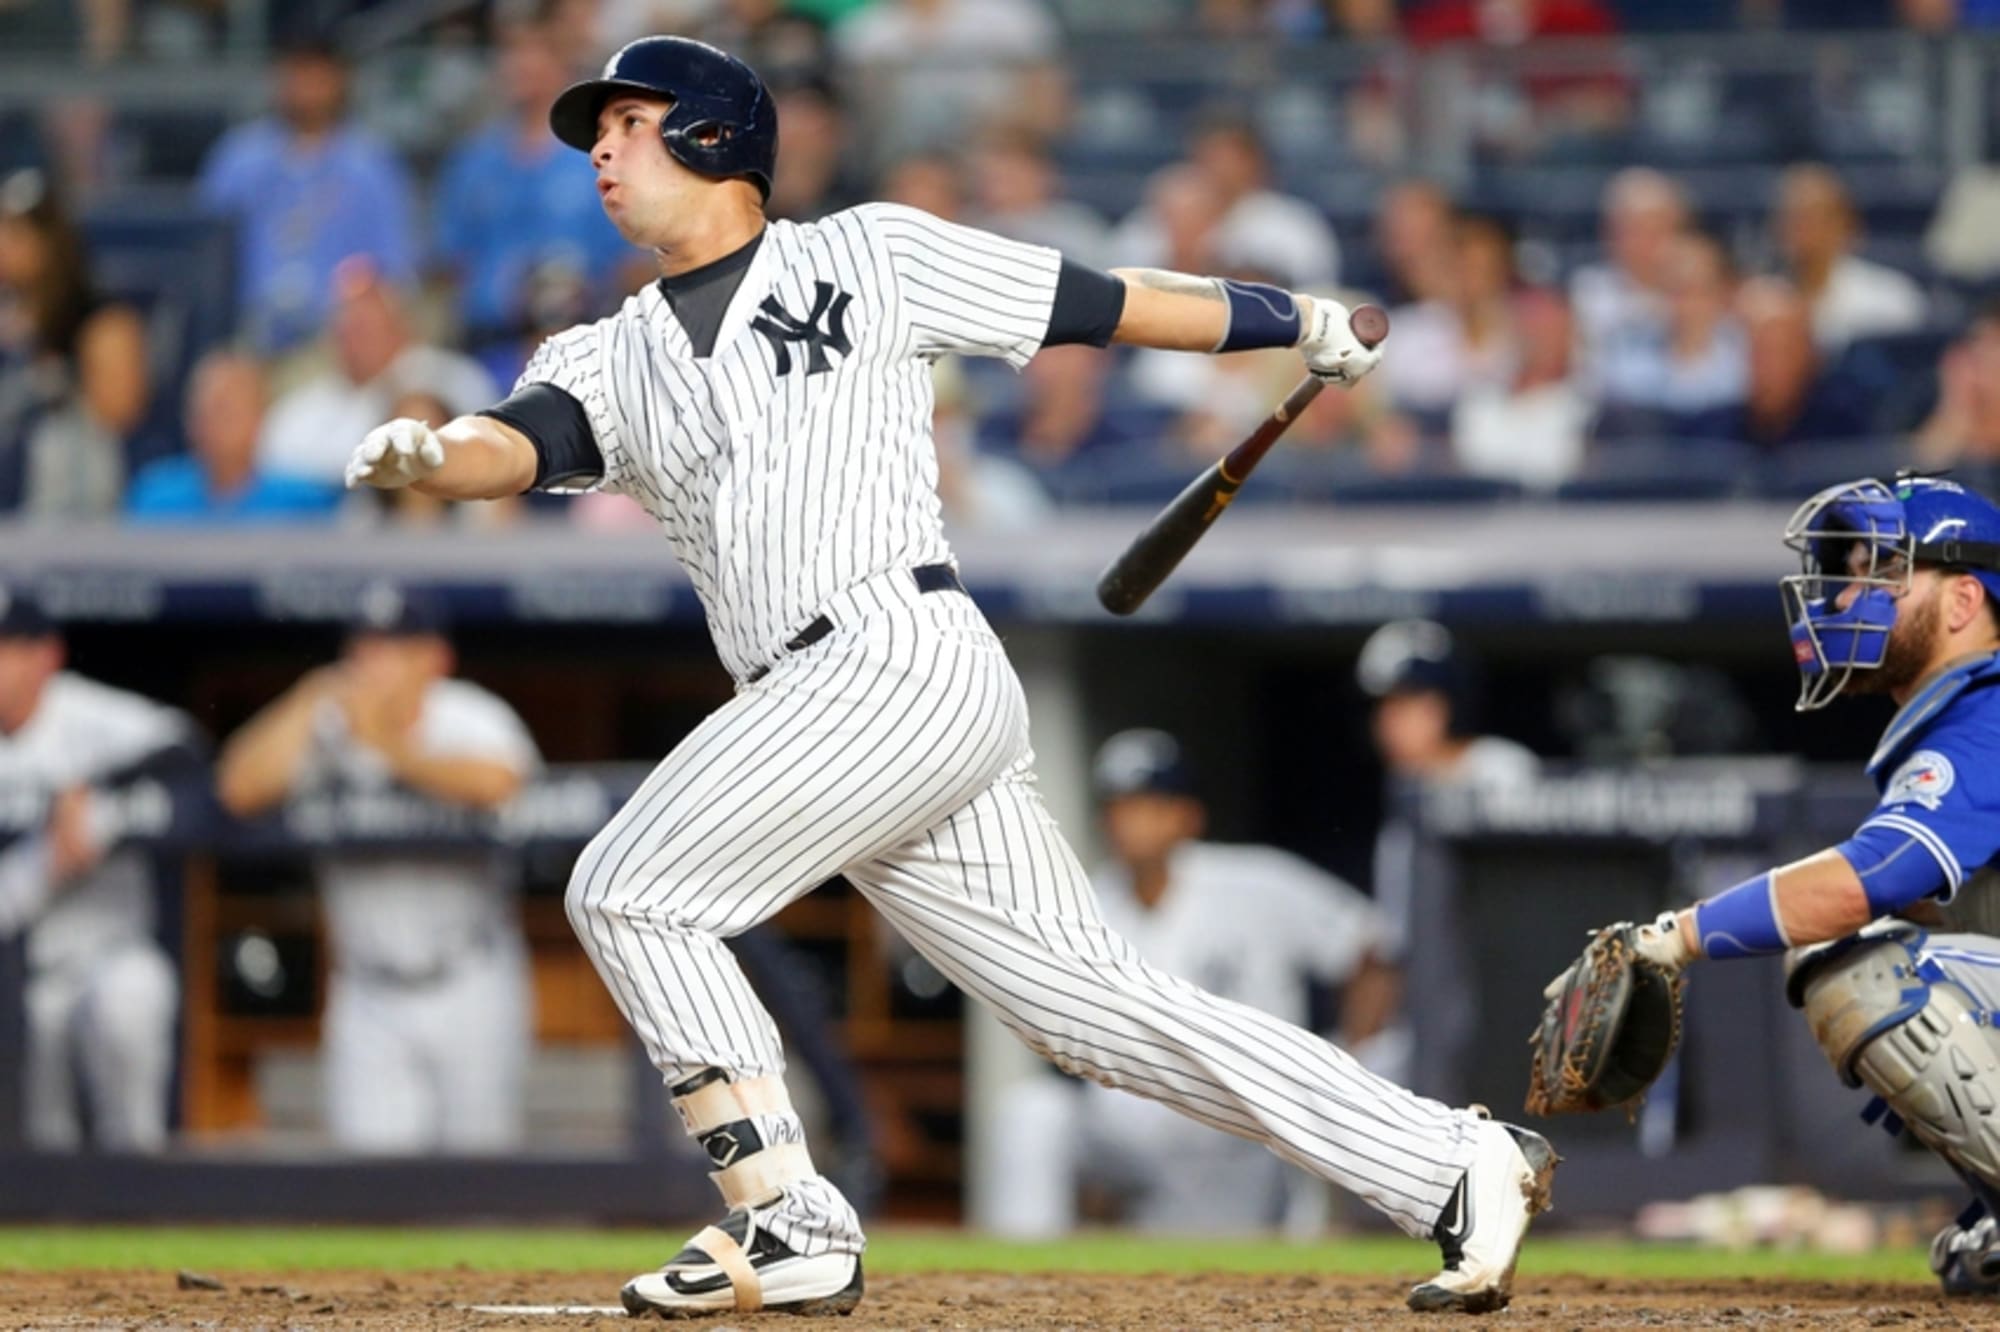 New York Yankees Catcher of the Future or Catcher of the Present?